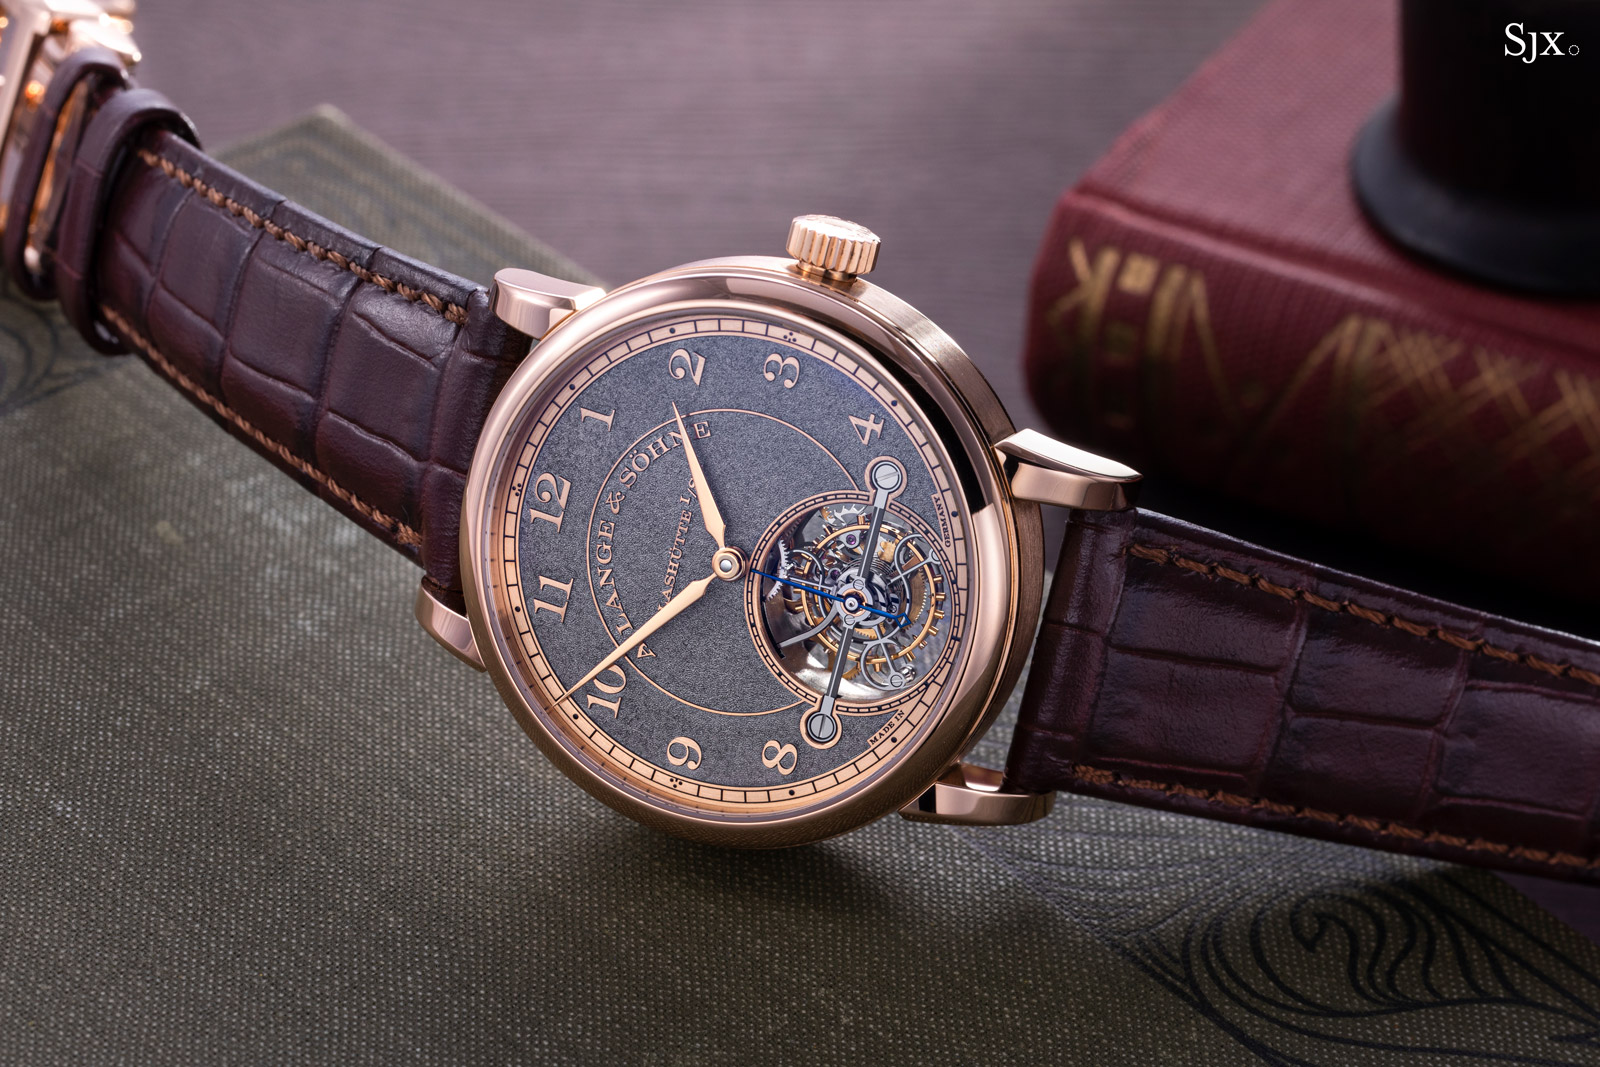 Exhibition: A. Lange & Söhne ‘Exceptional Masterpieces’ in Singapore ...